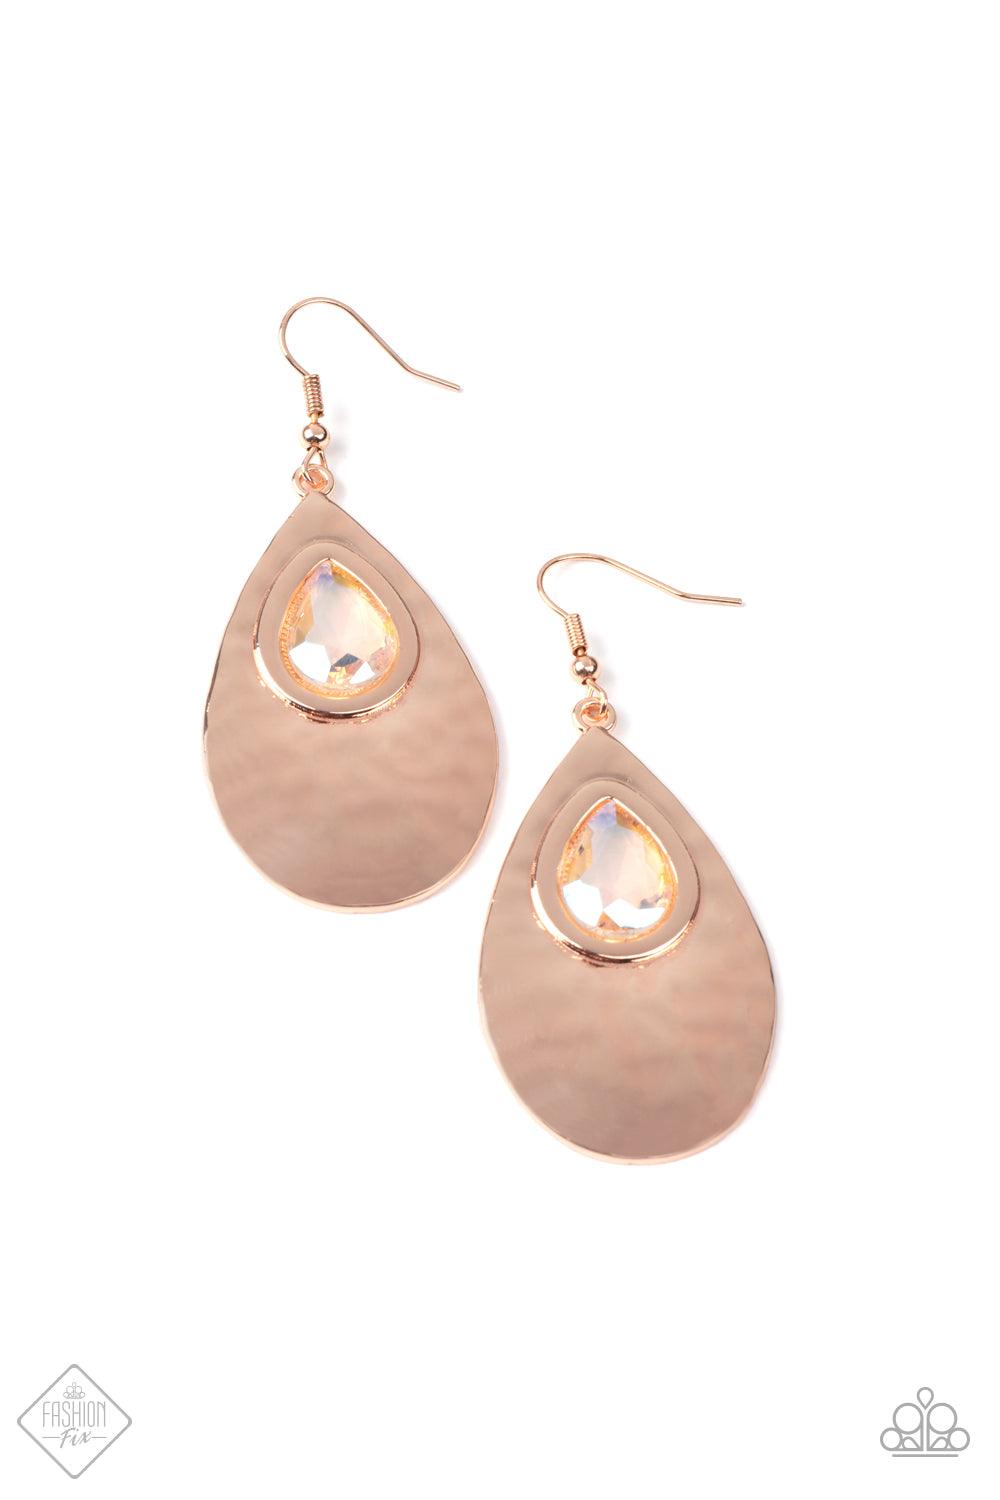 Paparazzi Accessories Tranquil Trove A shiny rose gold or silver teardrop is hammered in texture, creating a radiant display as the light bounces off each beveled surface. A faceted iridescent teardrop gem with Pale Rosette undertones is pressed into the